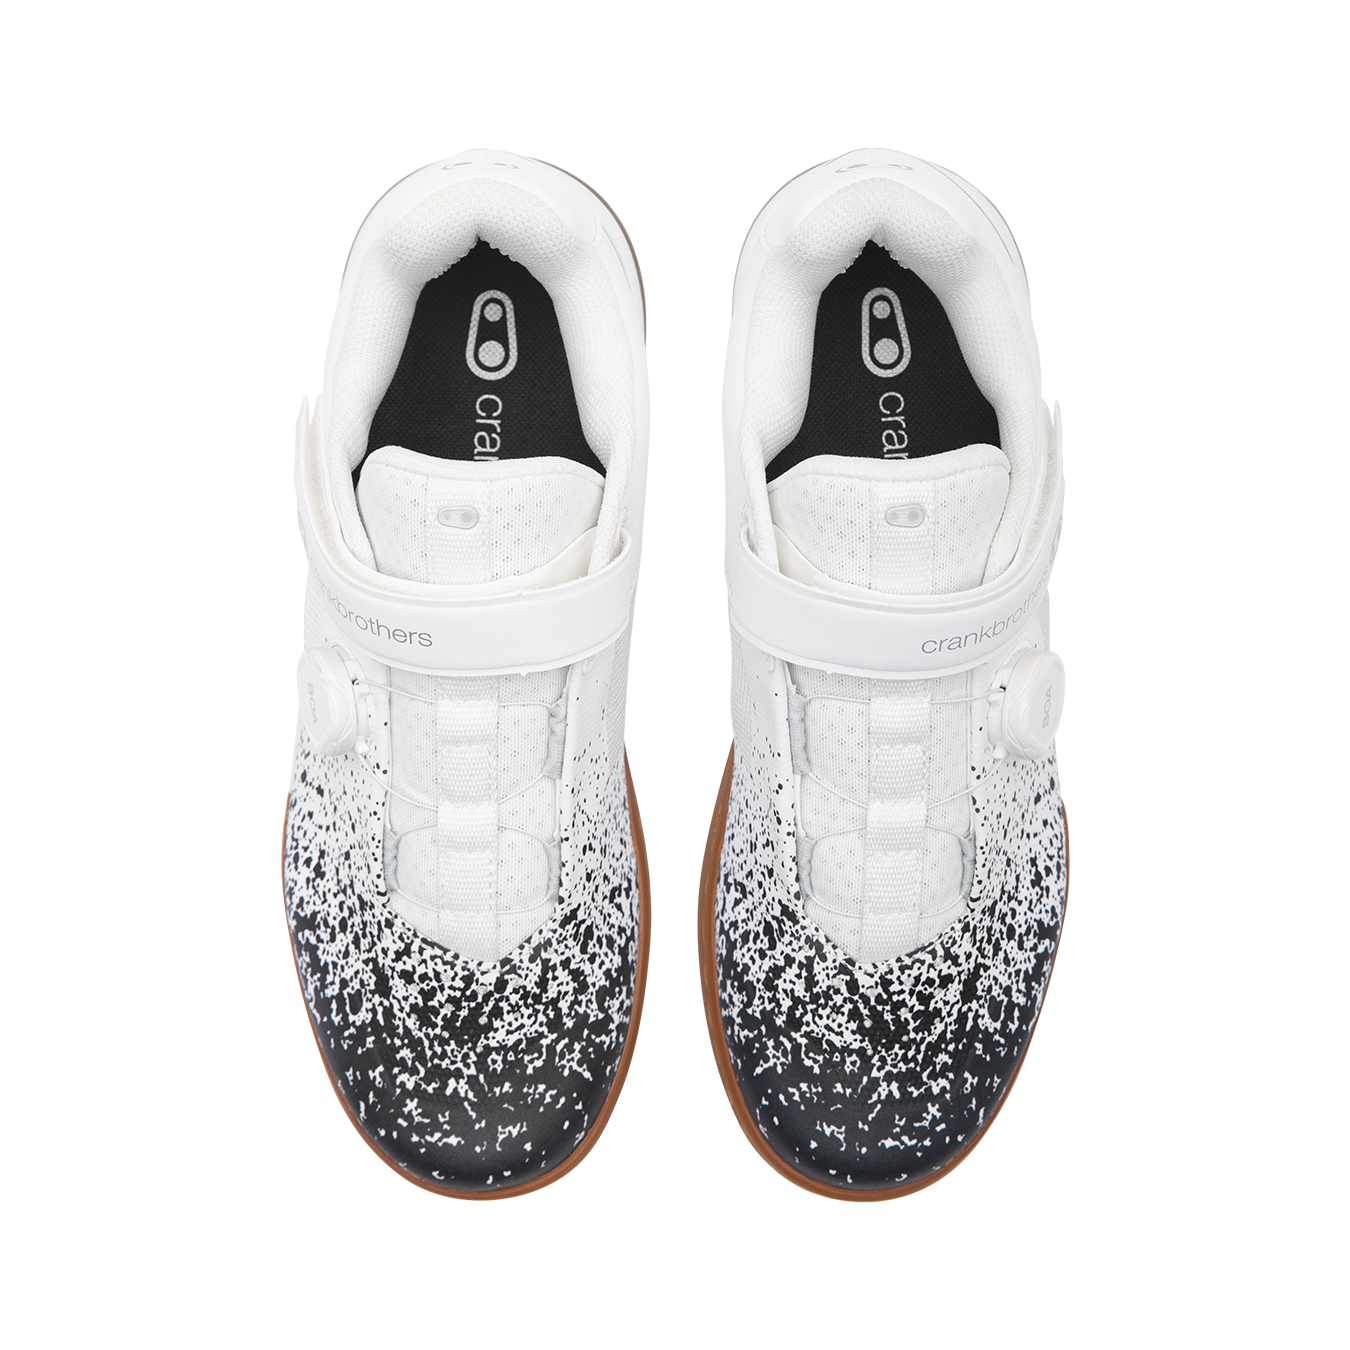 Crank Brothers Stamp BOA Flat Shoes - US 10 - Limited Edition: Black - White Splatter